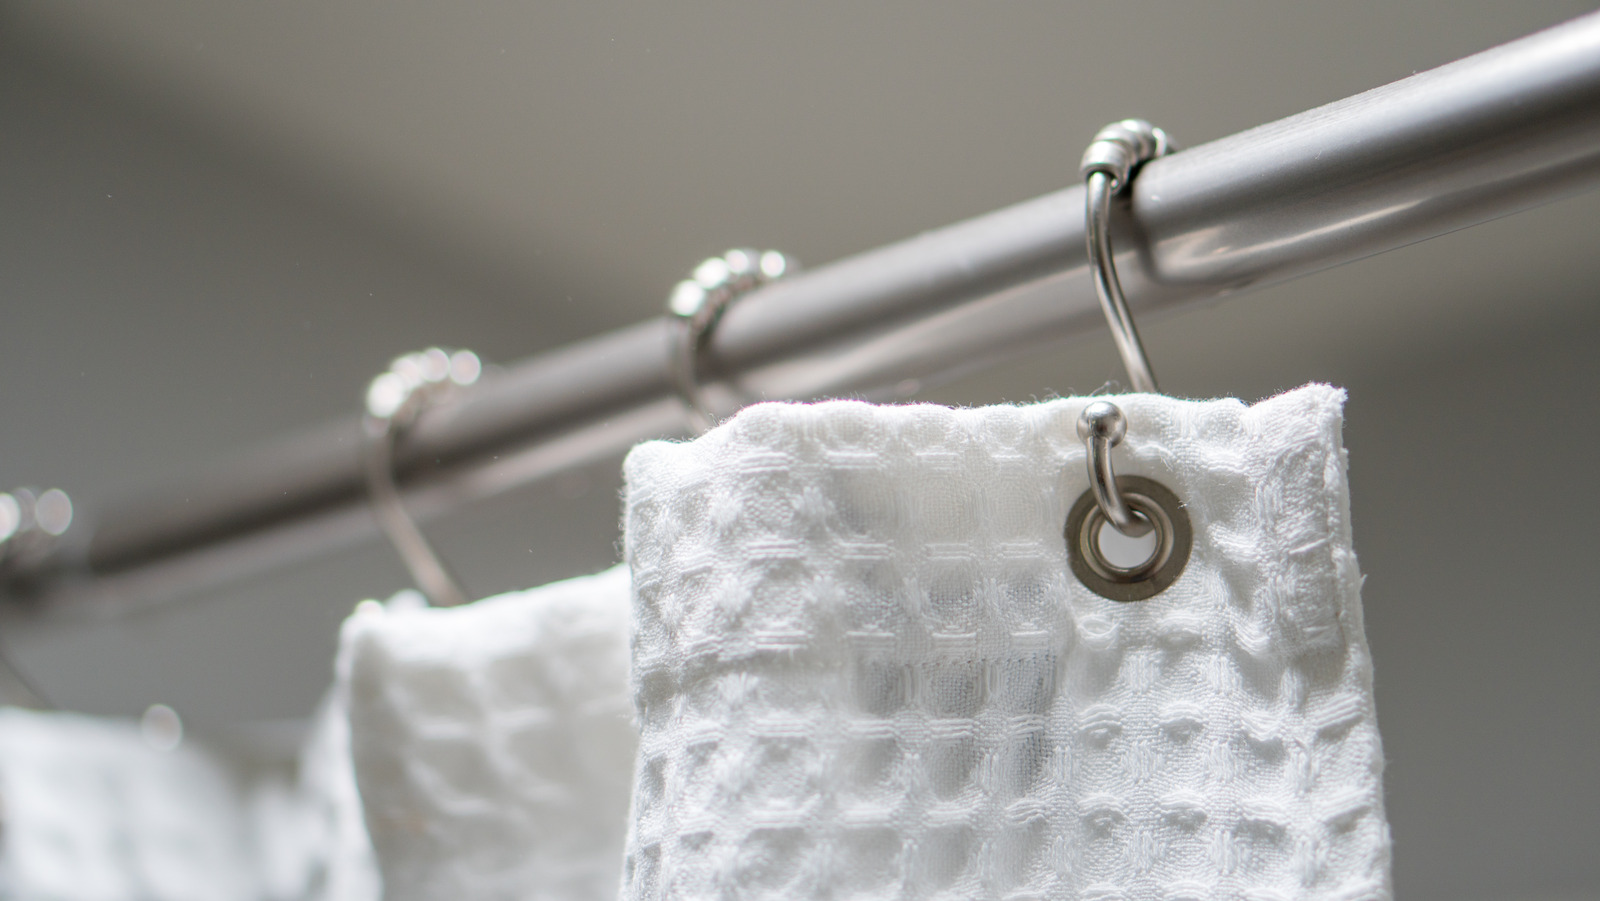 https://www.housedigest.com/img/gallery/double-your-showers-storage-space-with-this-simple-curtain-rod-hack/l-intro-1688667201.jpg